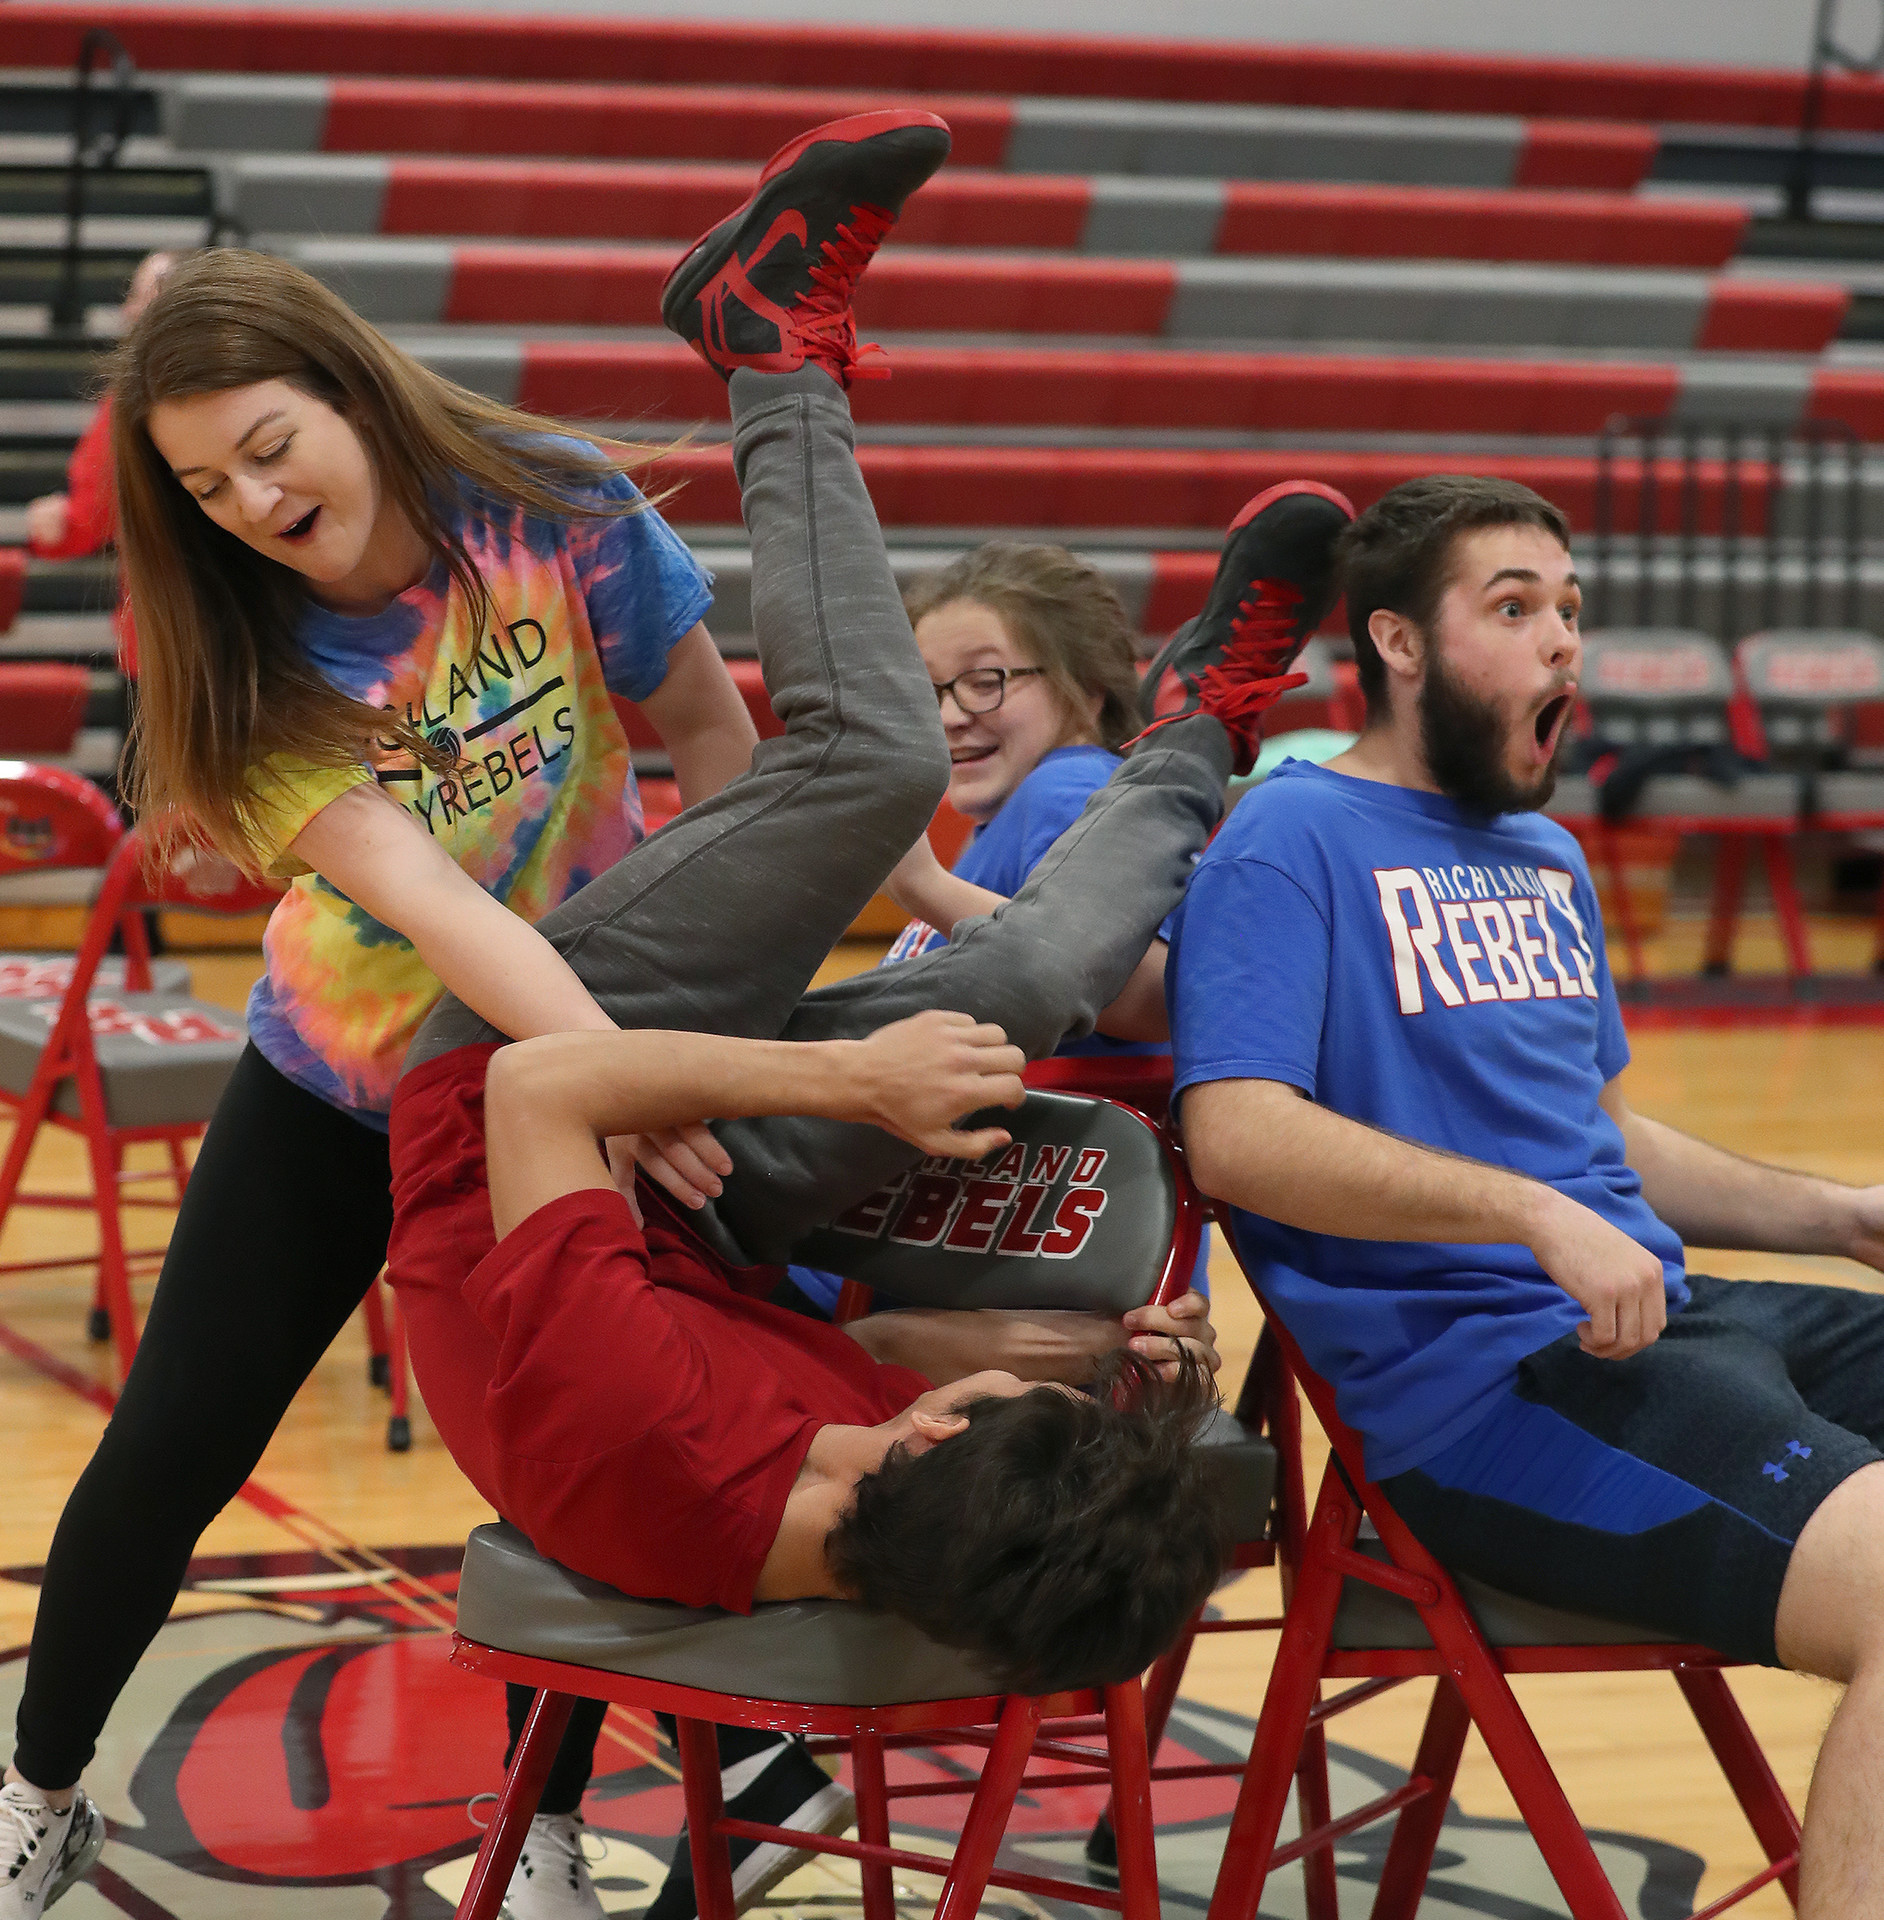 students at a pep assembly playing musical chairs